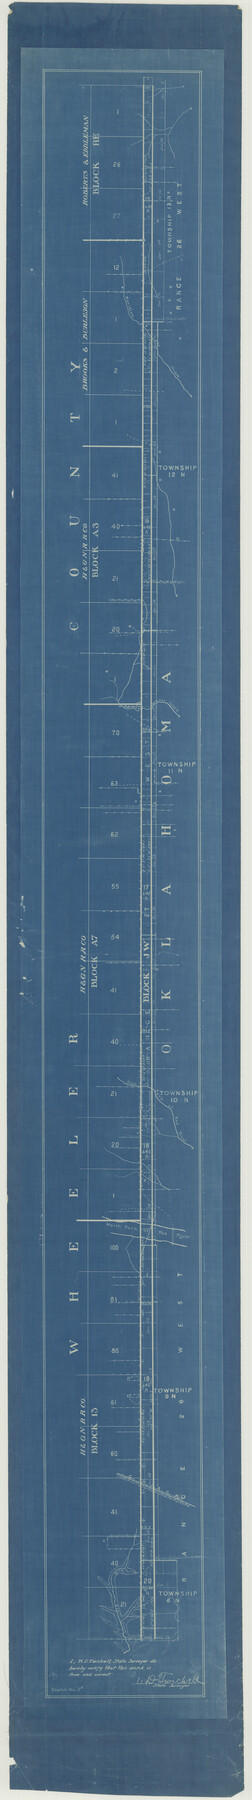 65380, Texas Panhandle East Boundary Line, General Map Collection